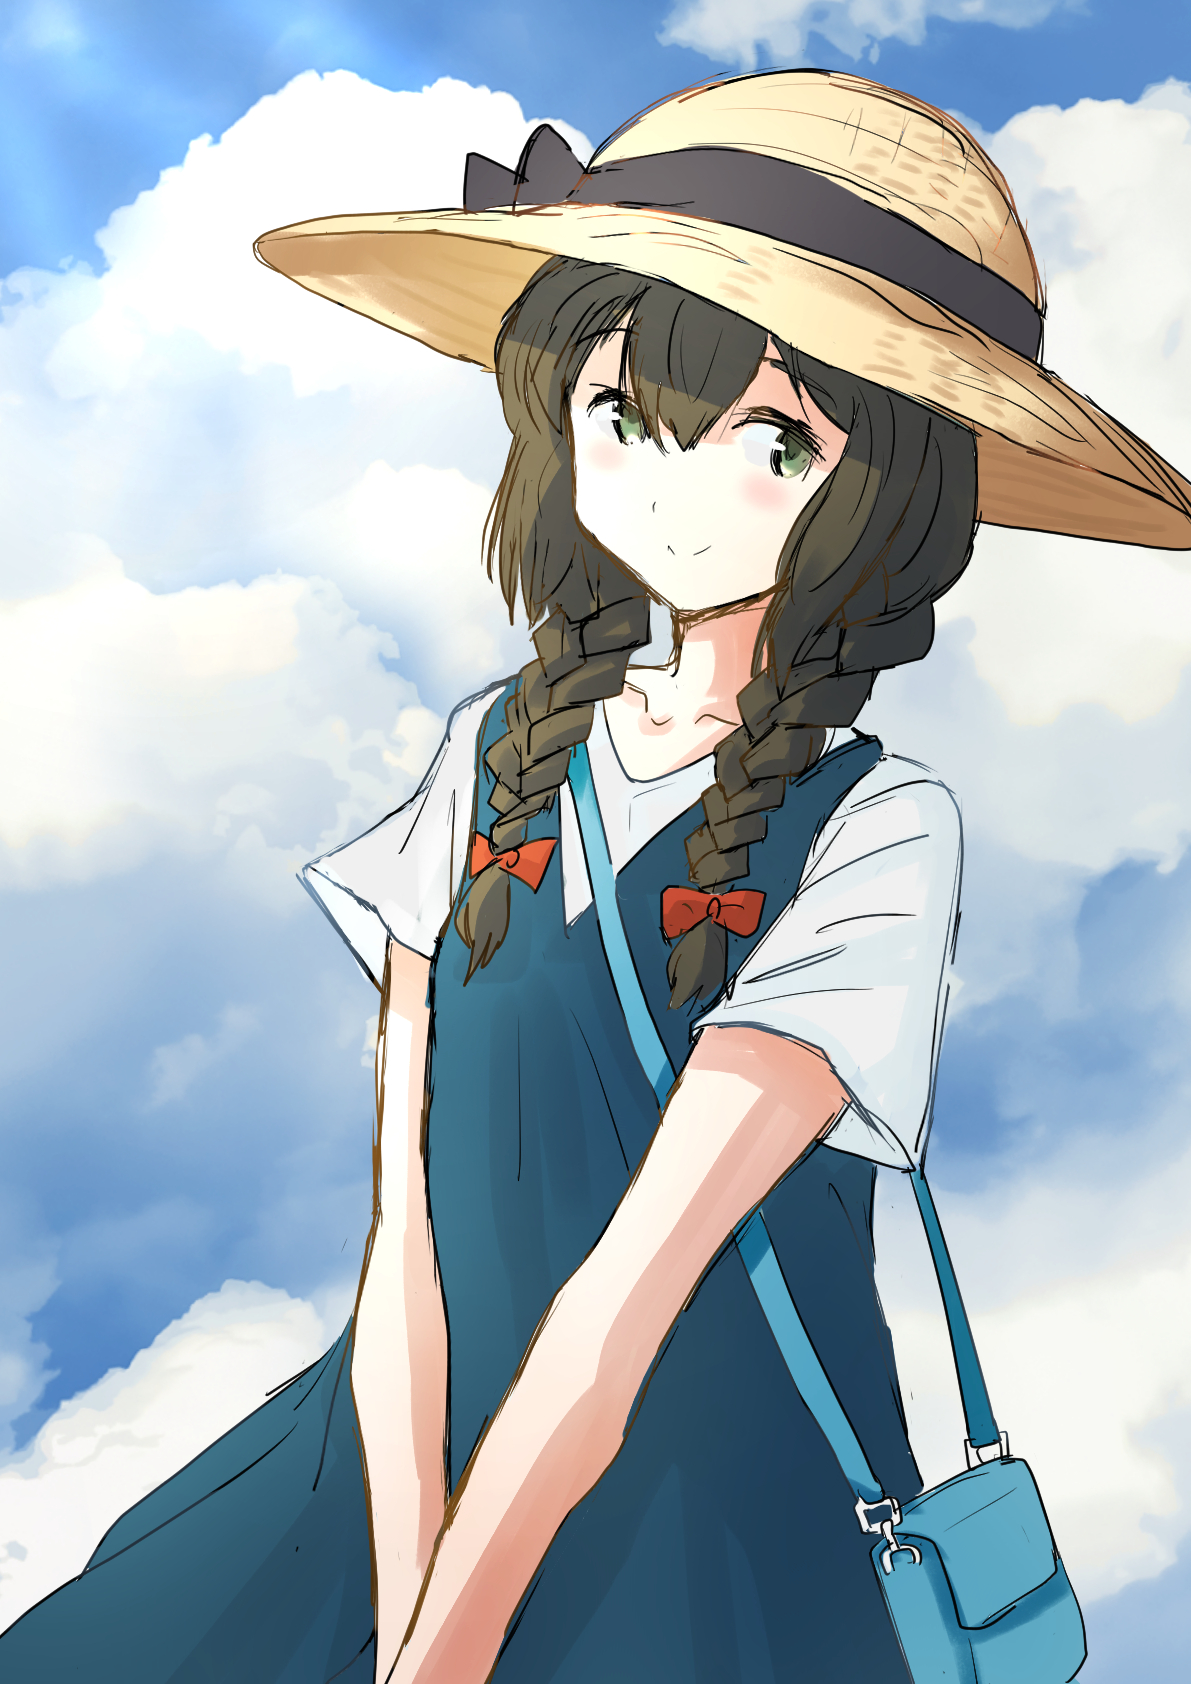 Anime 1191x1684 Isonami (KanColle) Kantai Collection anime anime girls braids brunette artwork digital art fan art portrait display smiling closed mouth short sleeves sky shoulder length hair sunlight sun hats clouds hair bows purse hair between eyes looking at viewer standing twintails collarbone